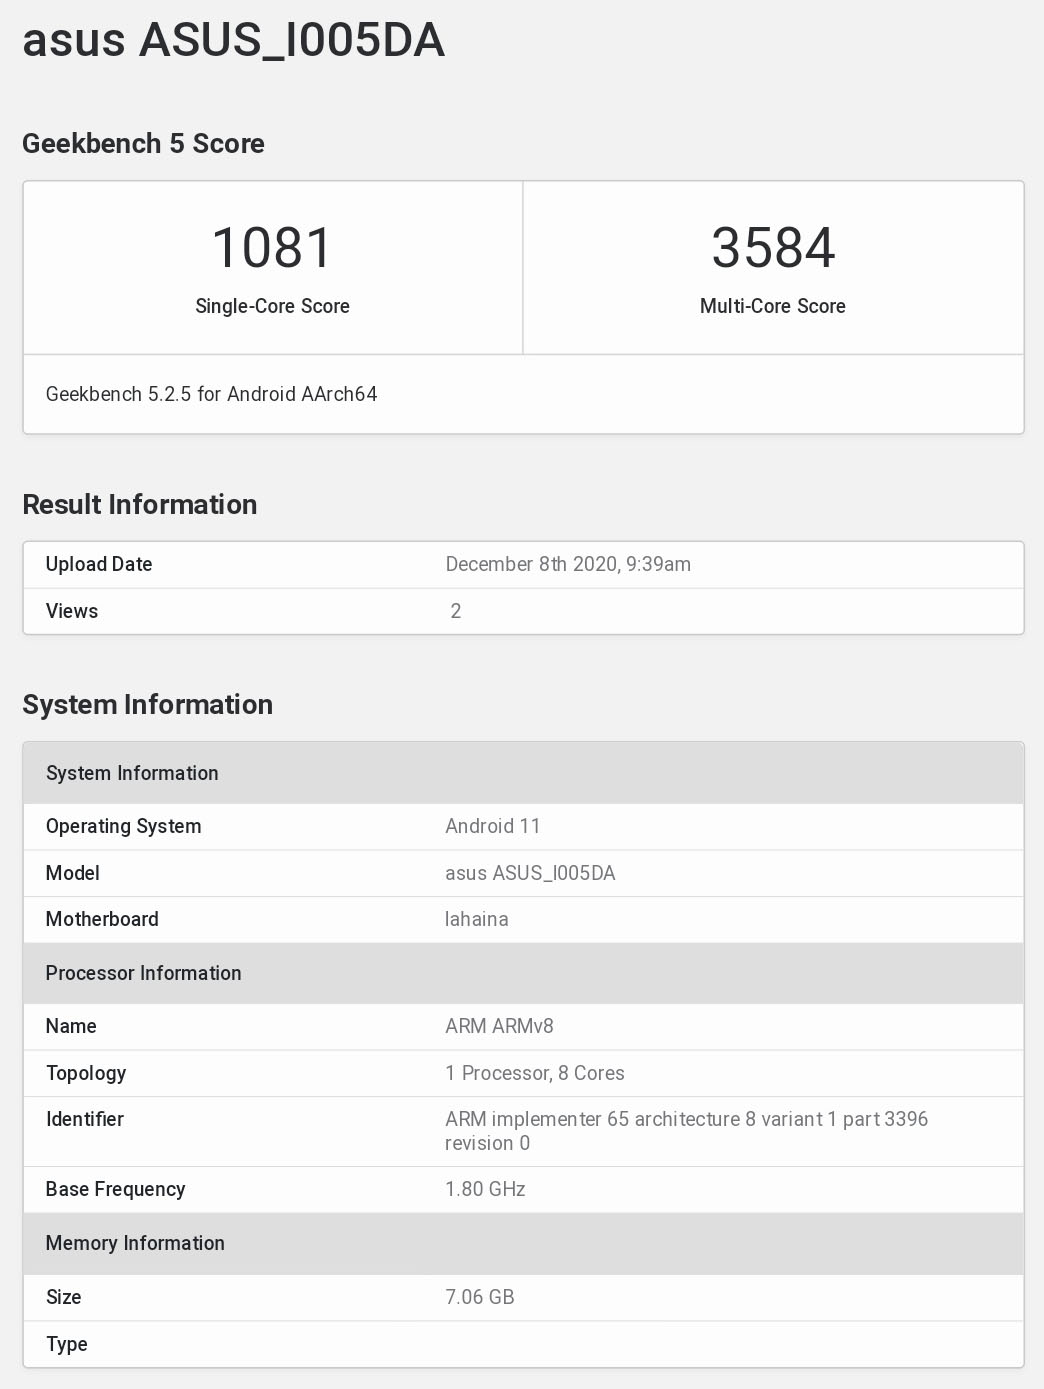 Asus ROG 4 (ASUS_I005DA) spotted on Geekbench